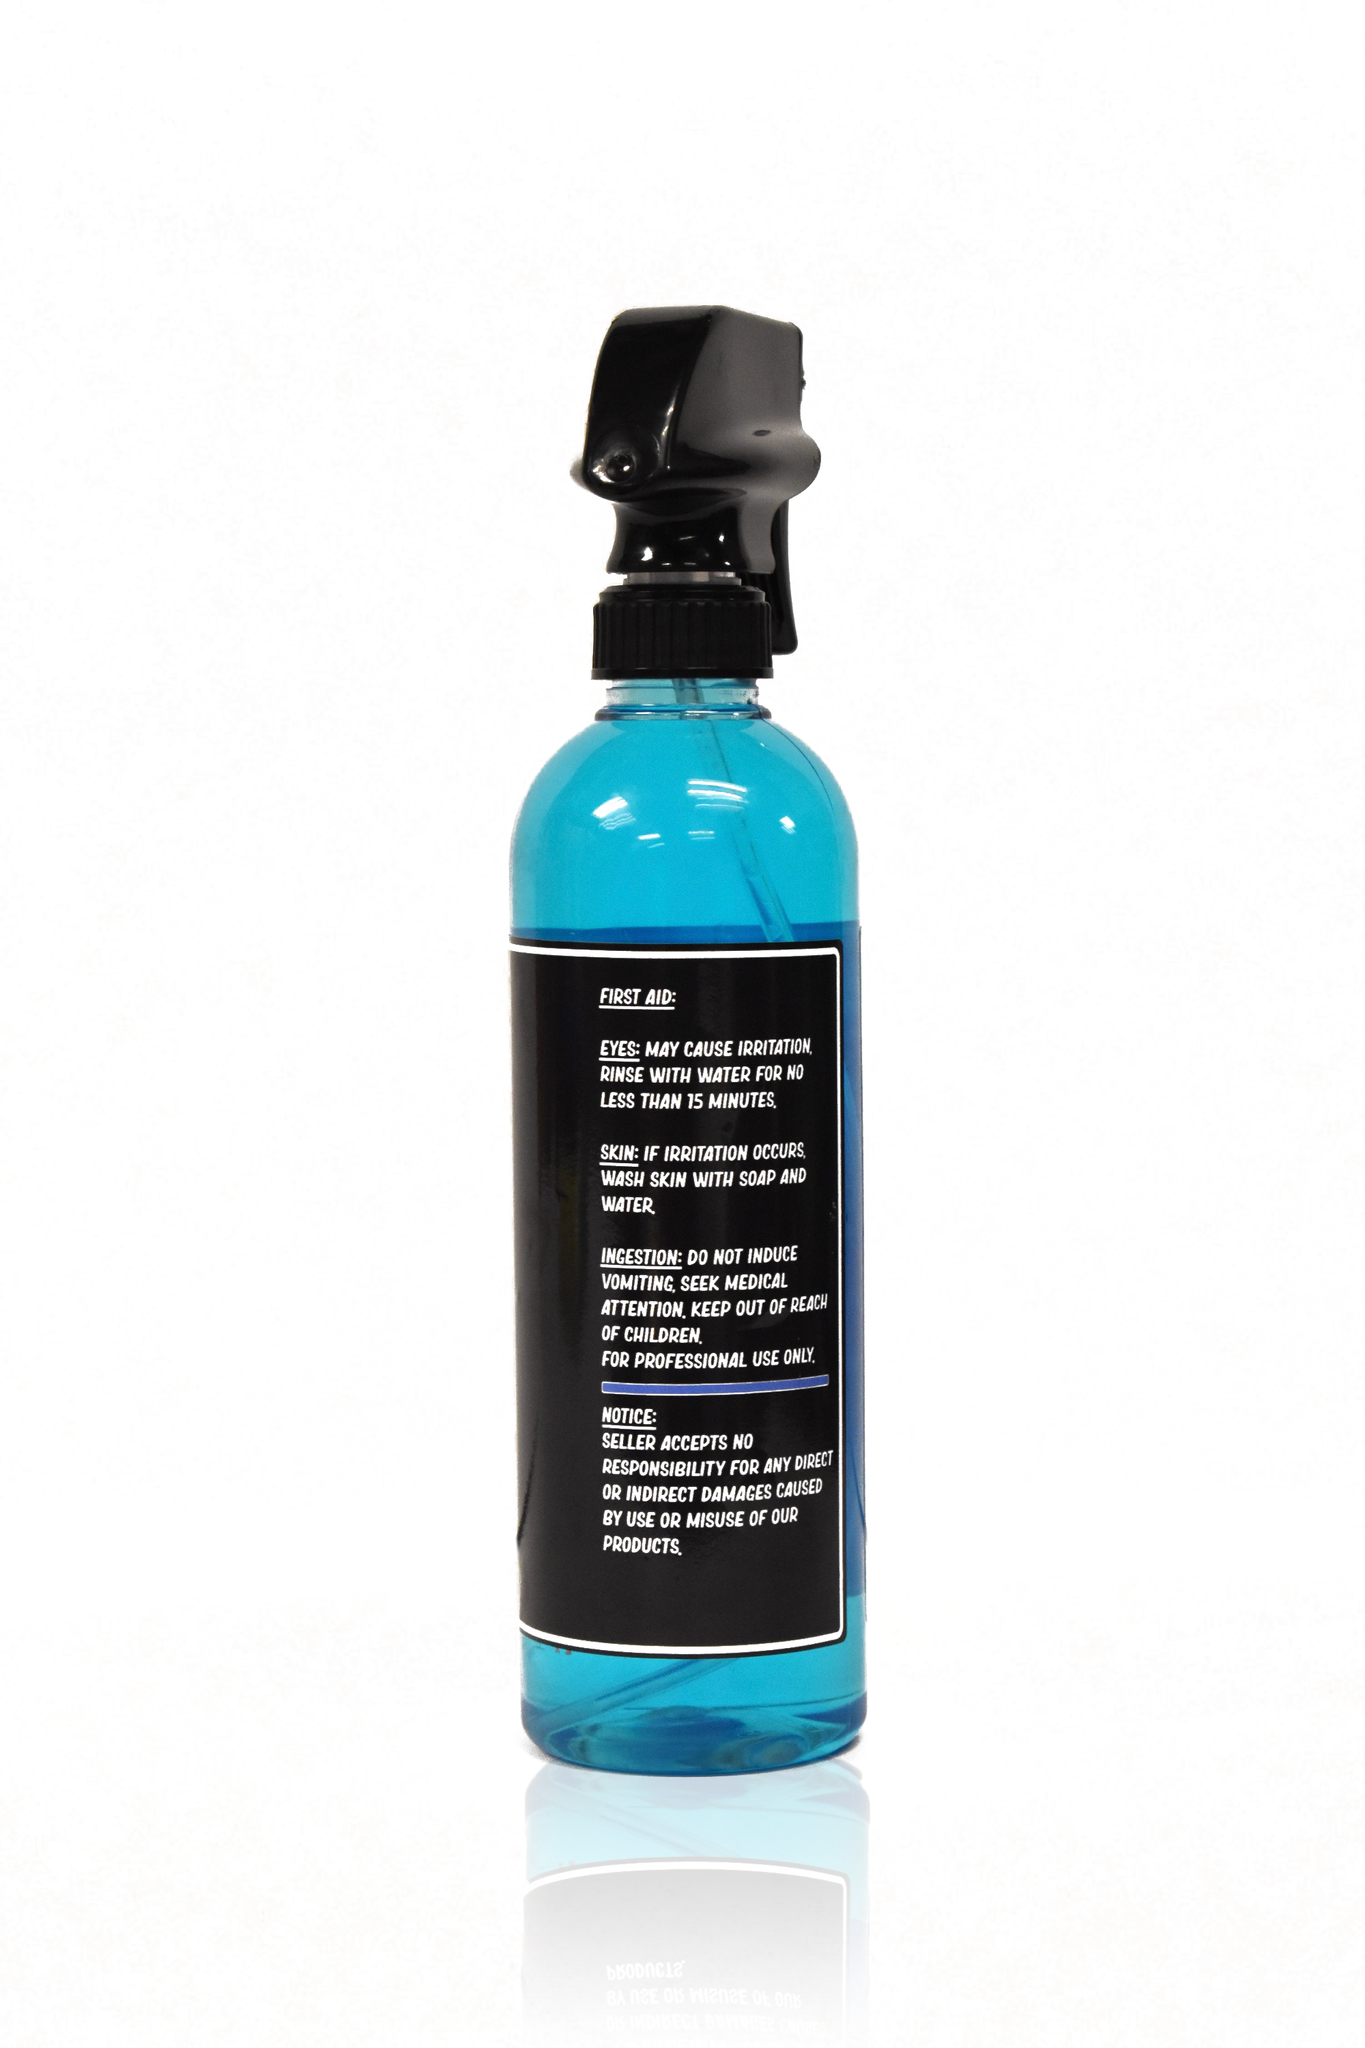 Glass Cleaner(16oz)